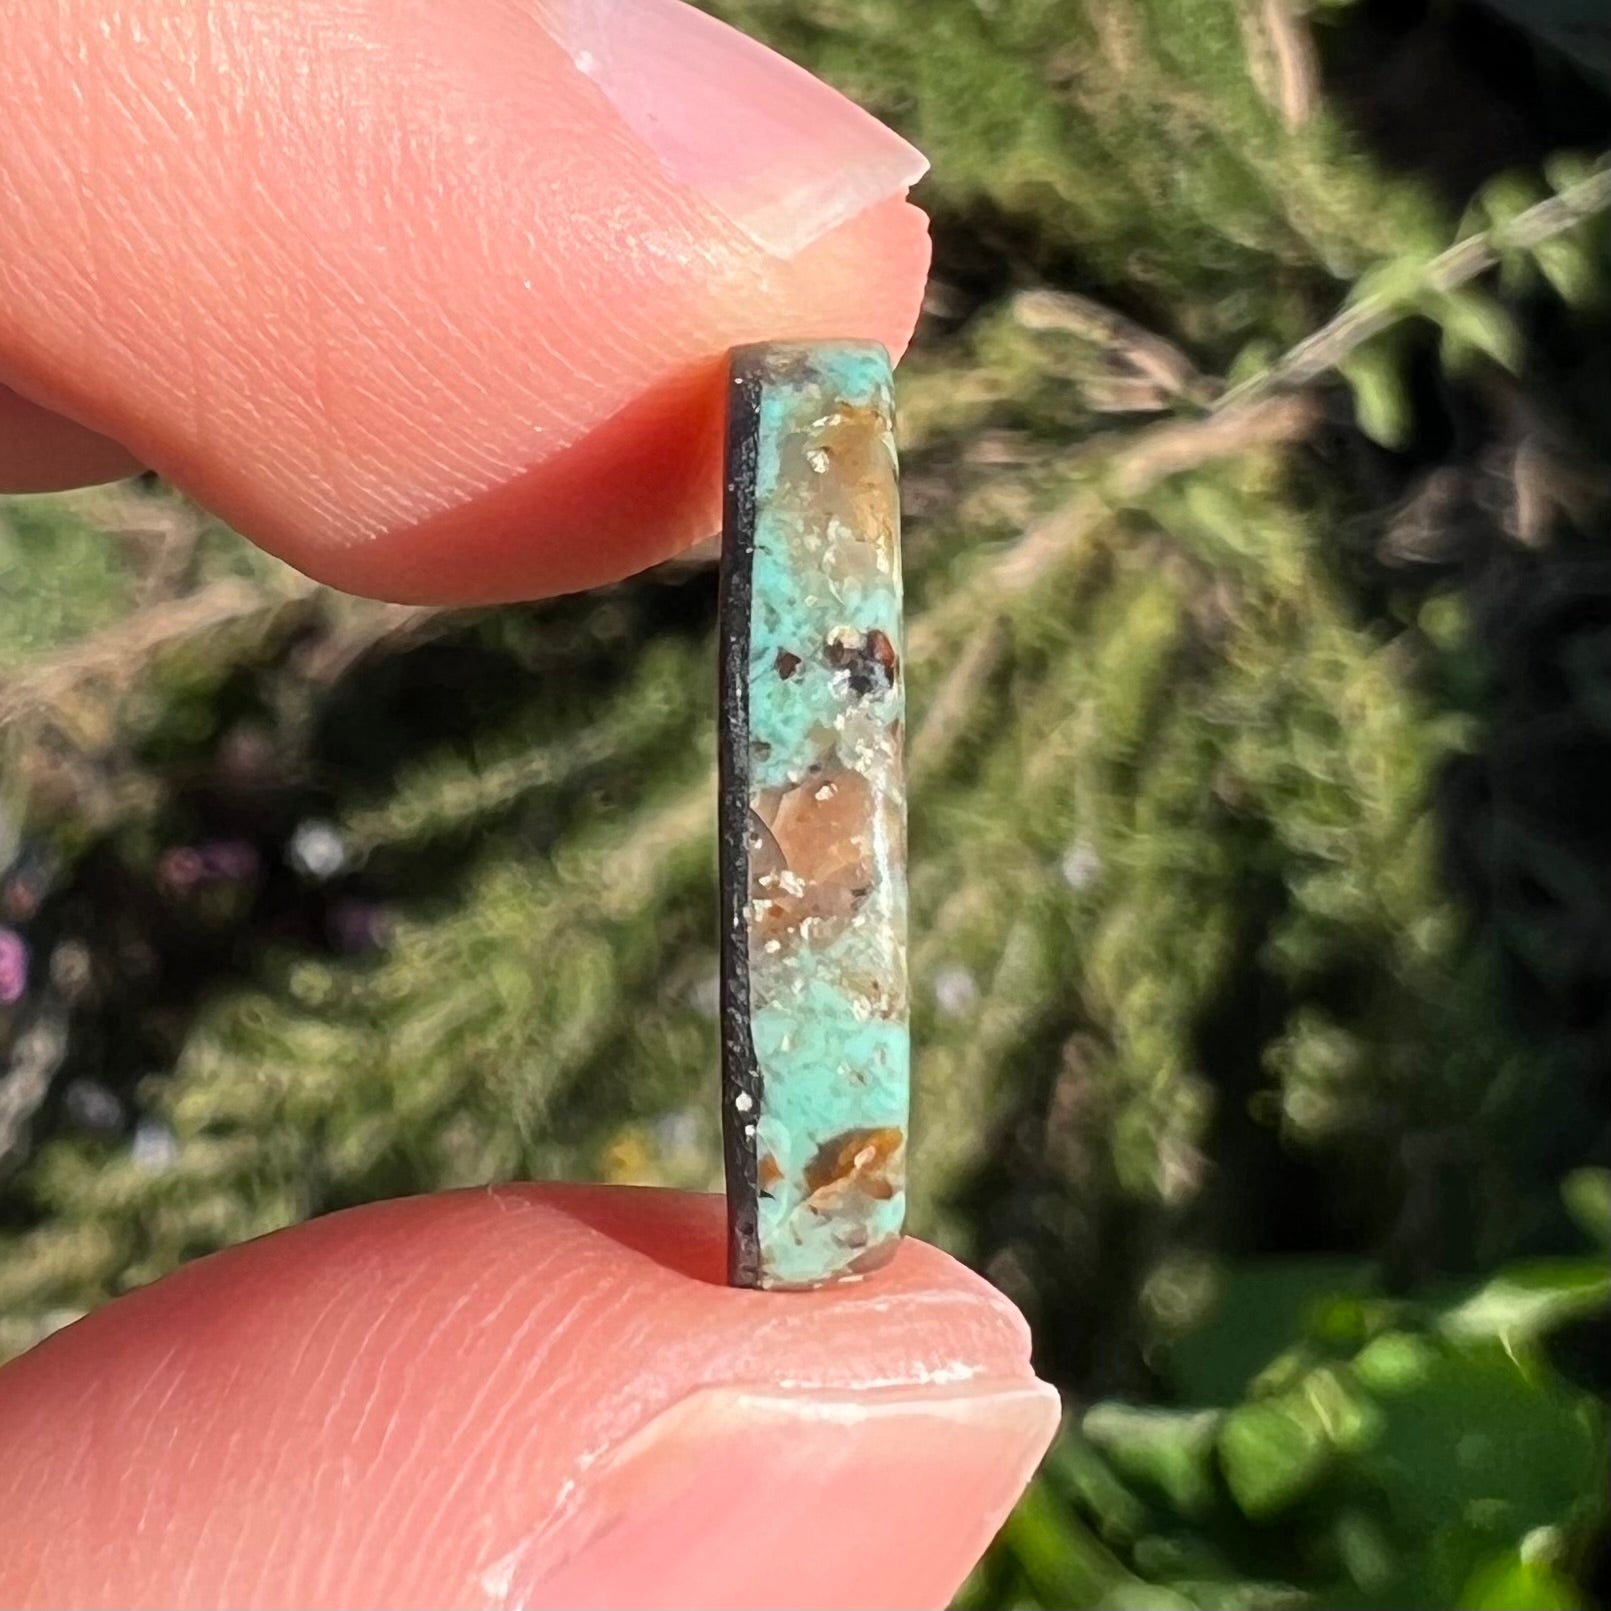 A loose turquoise cabochon.  The stone is greenish blue with black, brown, and white quartz matrix.